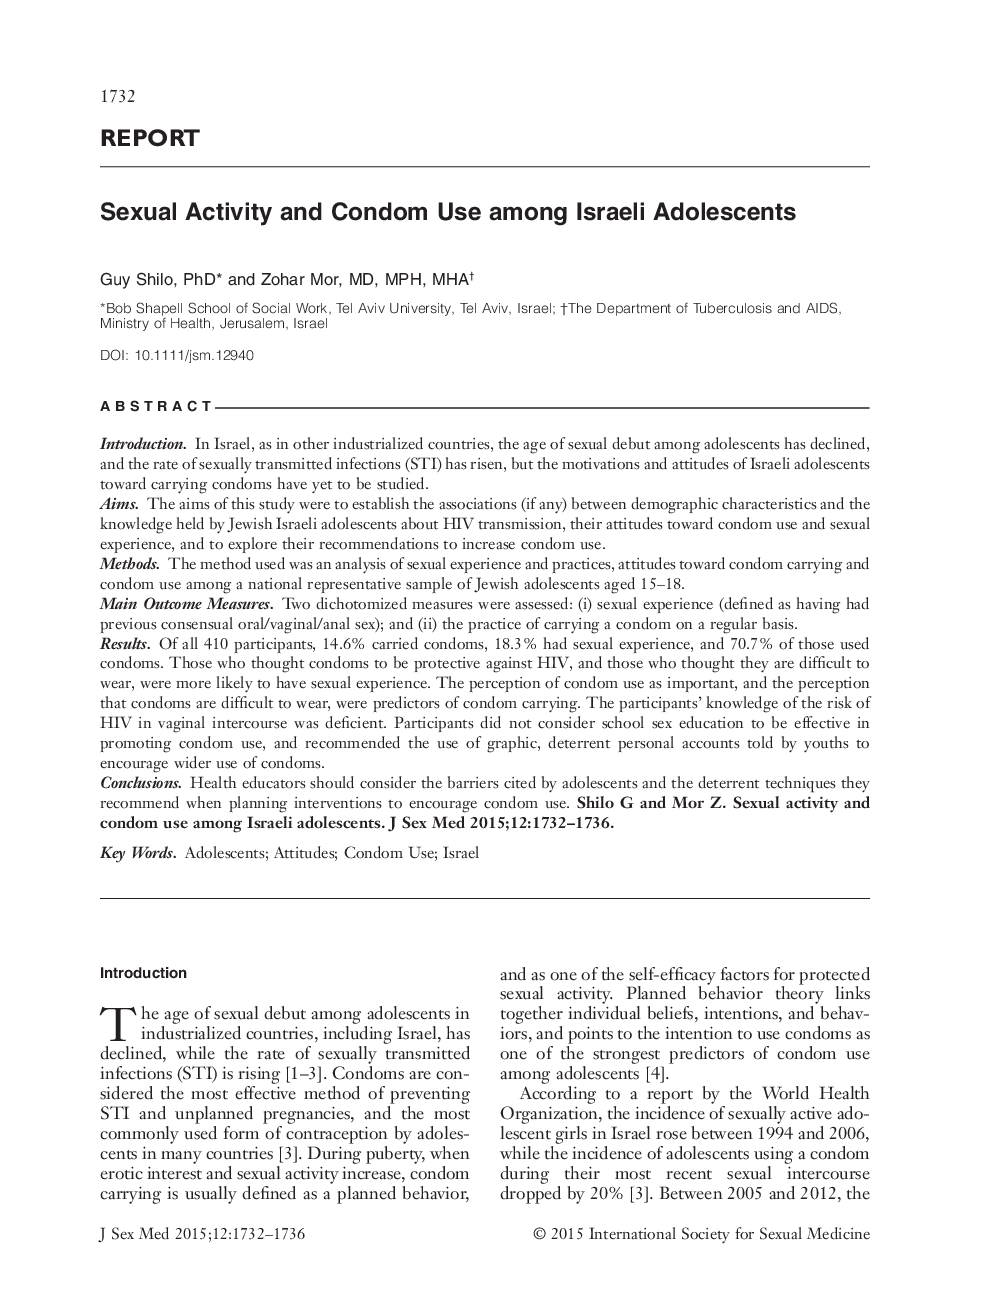 Sexual Activity and Condom Use among Israeli Adolescents